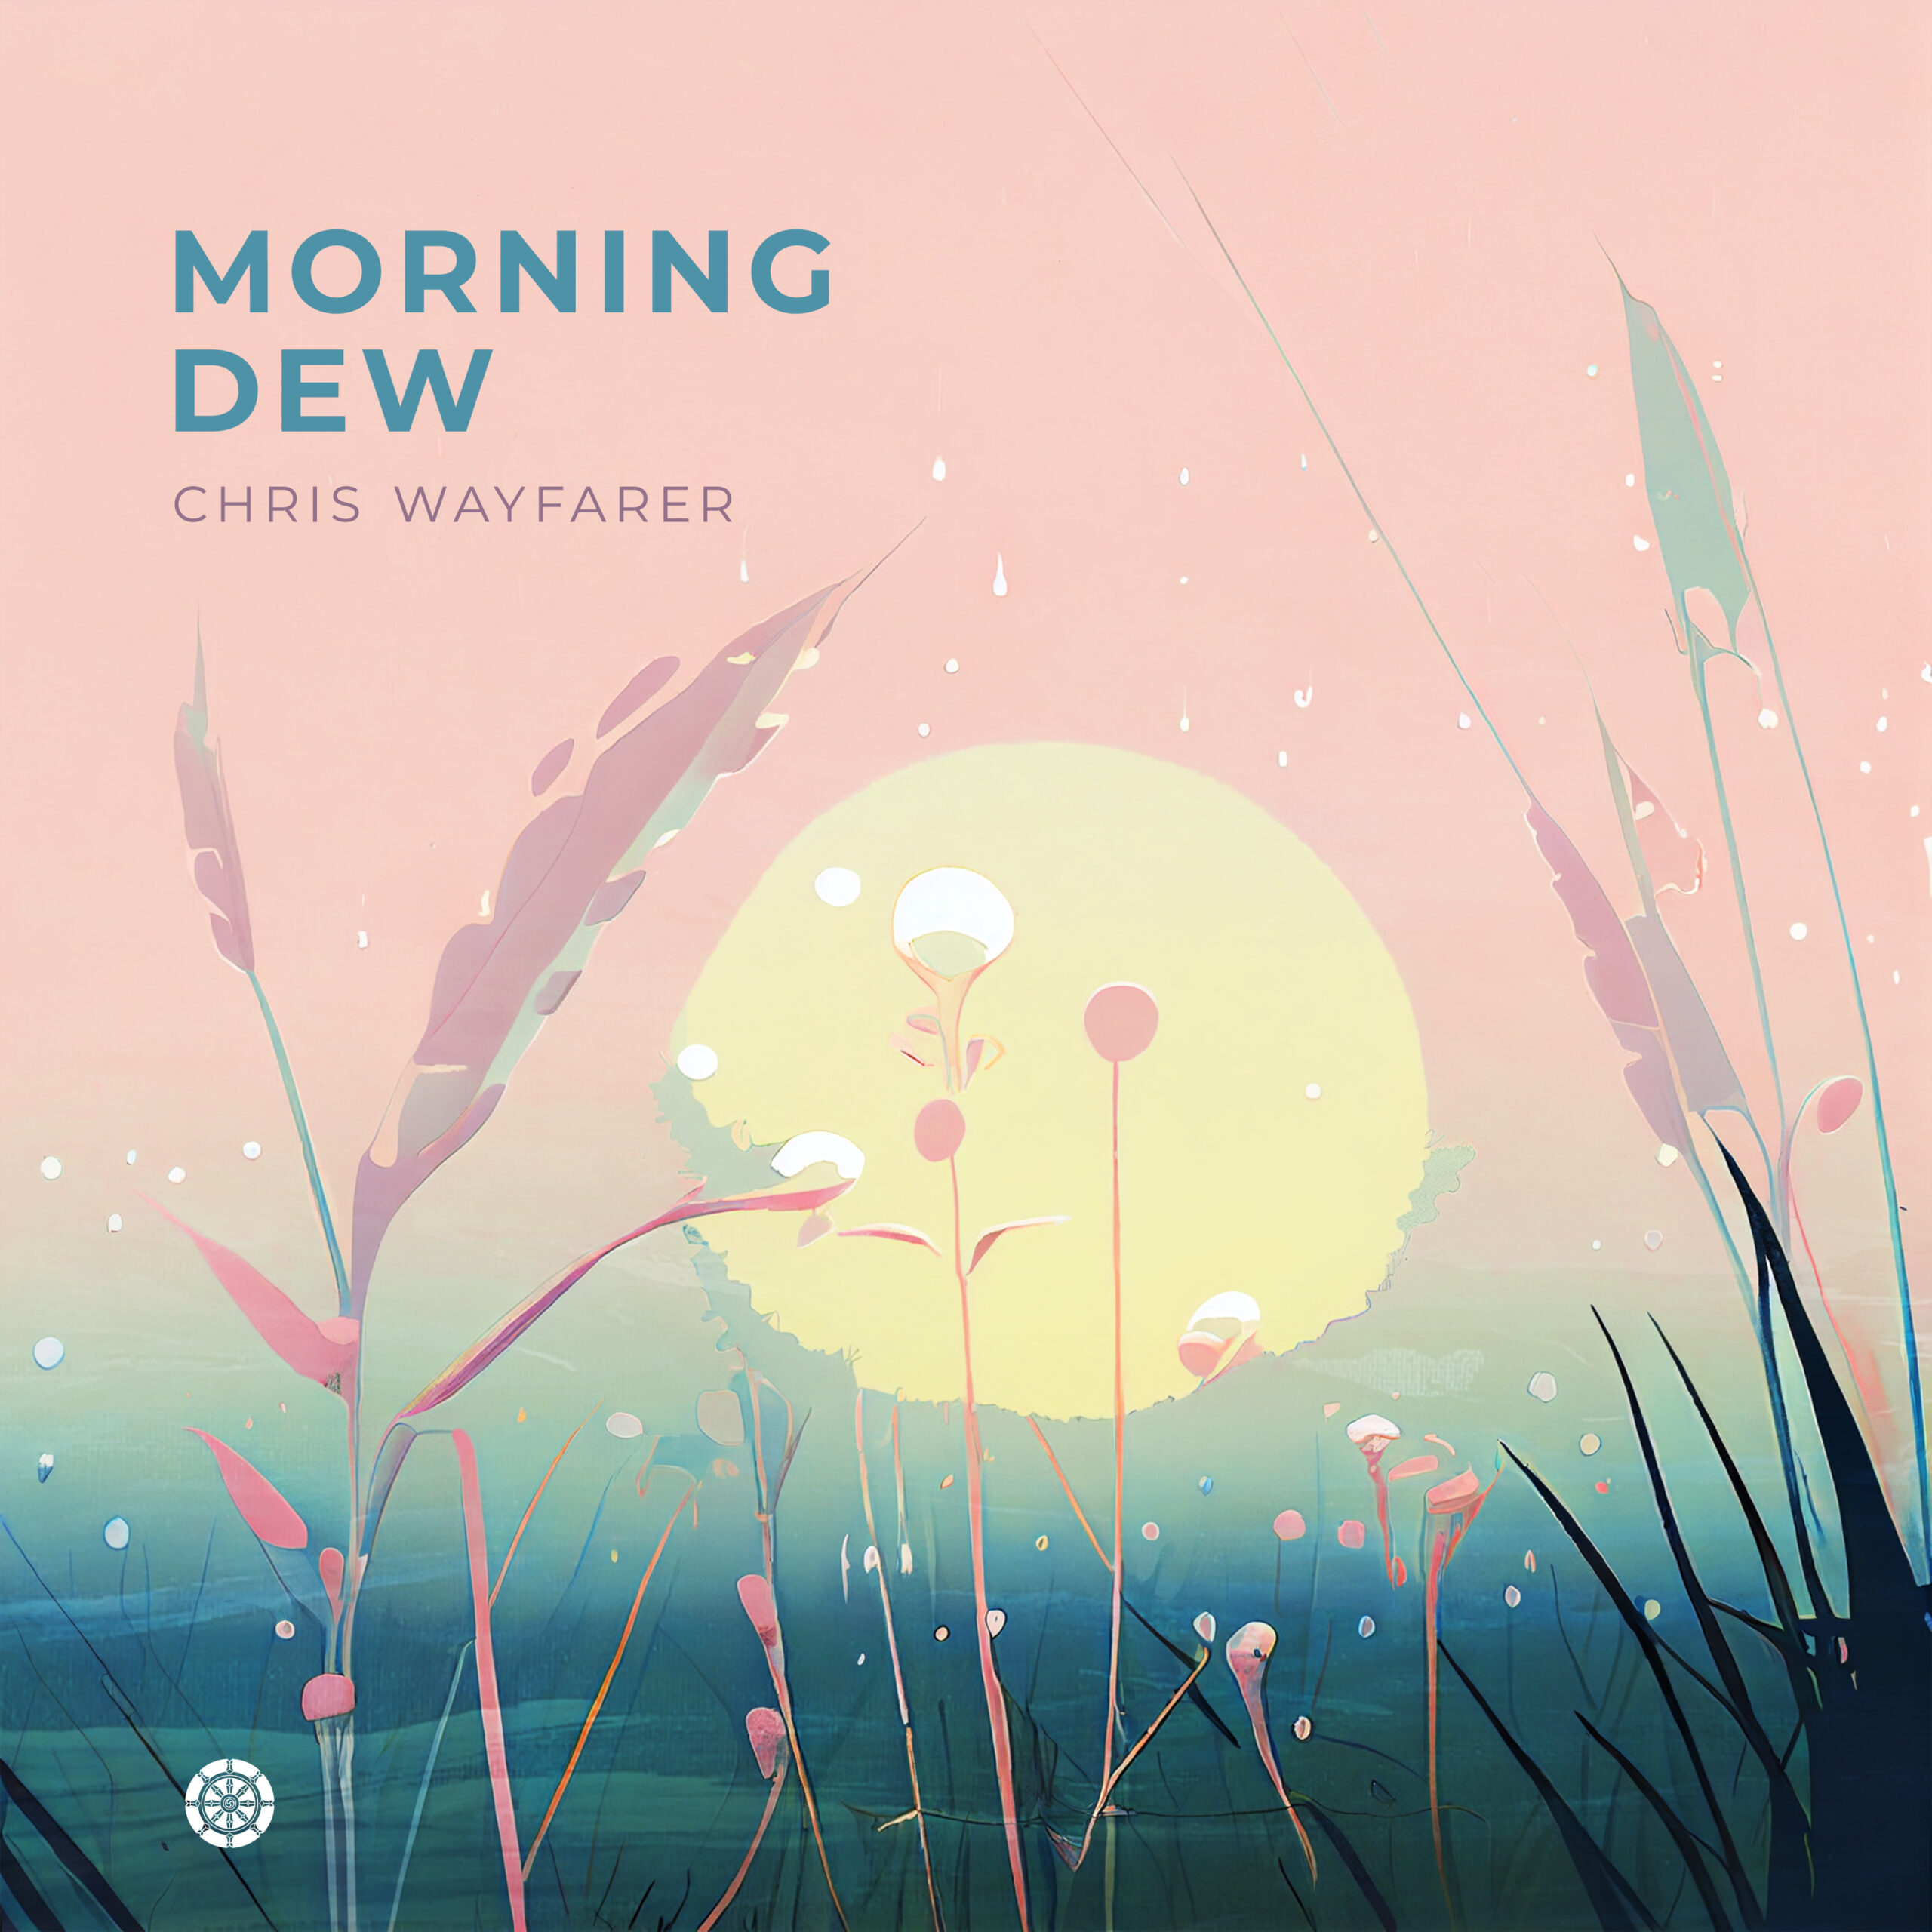 Morning Dew, written and produced by Chris Wayfarer